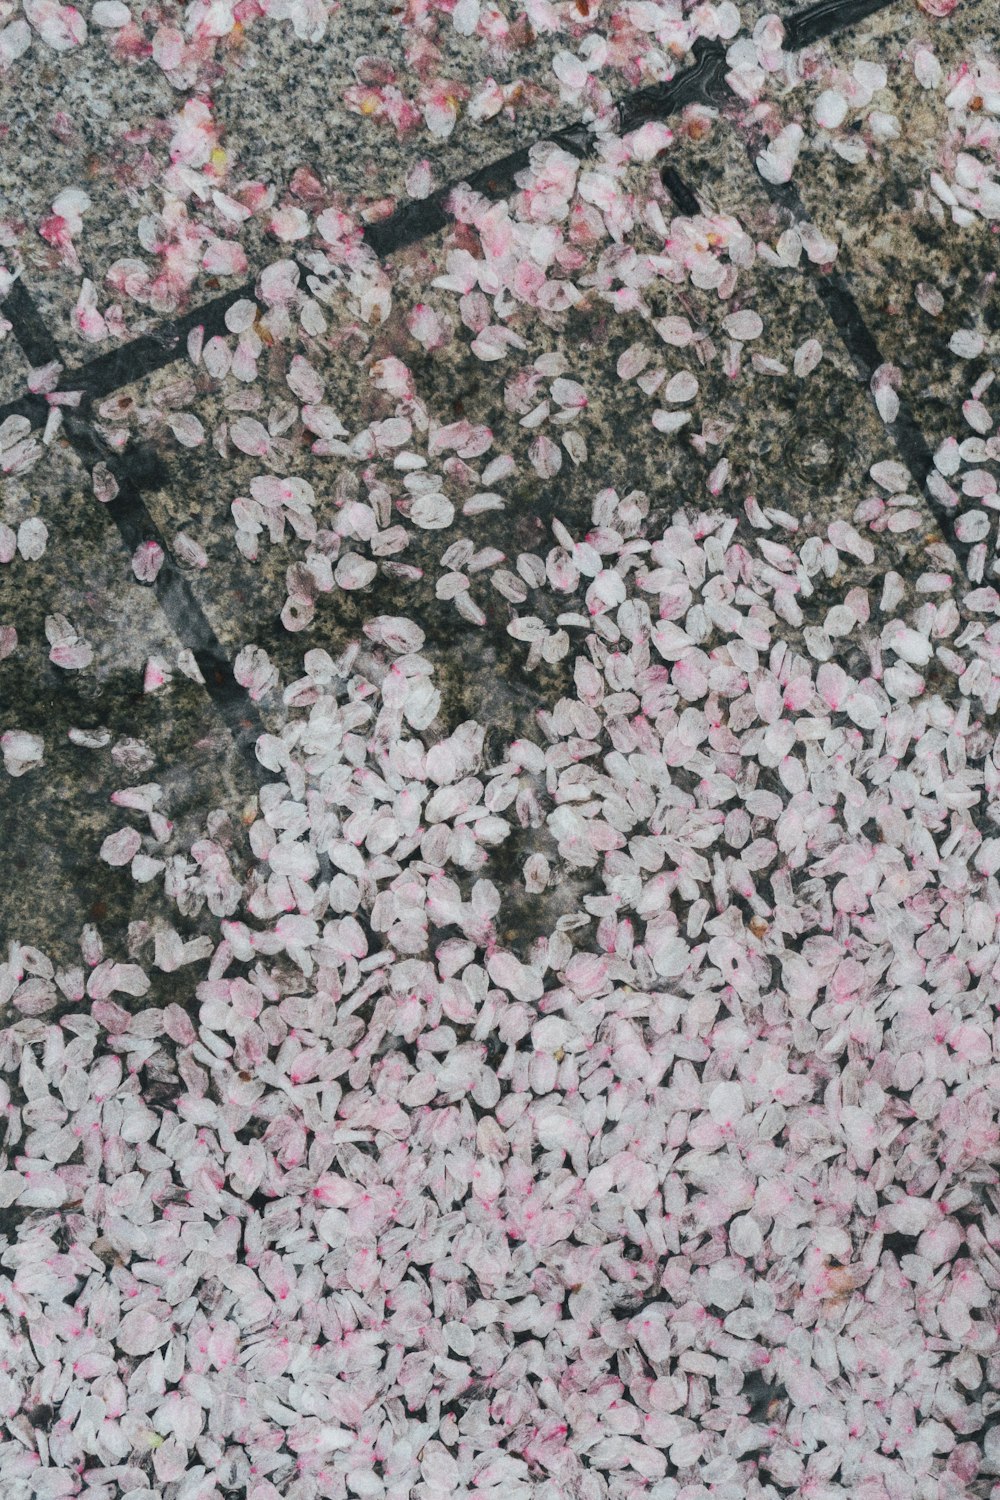 pink and white petals on ground